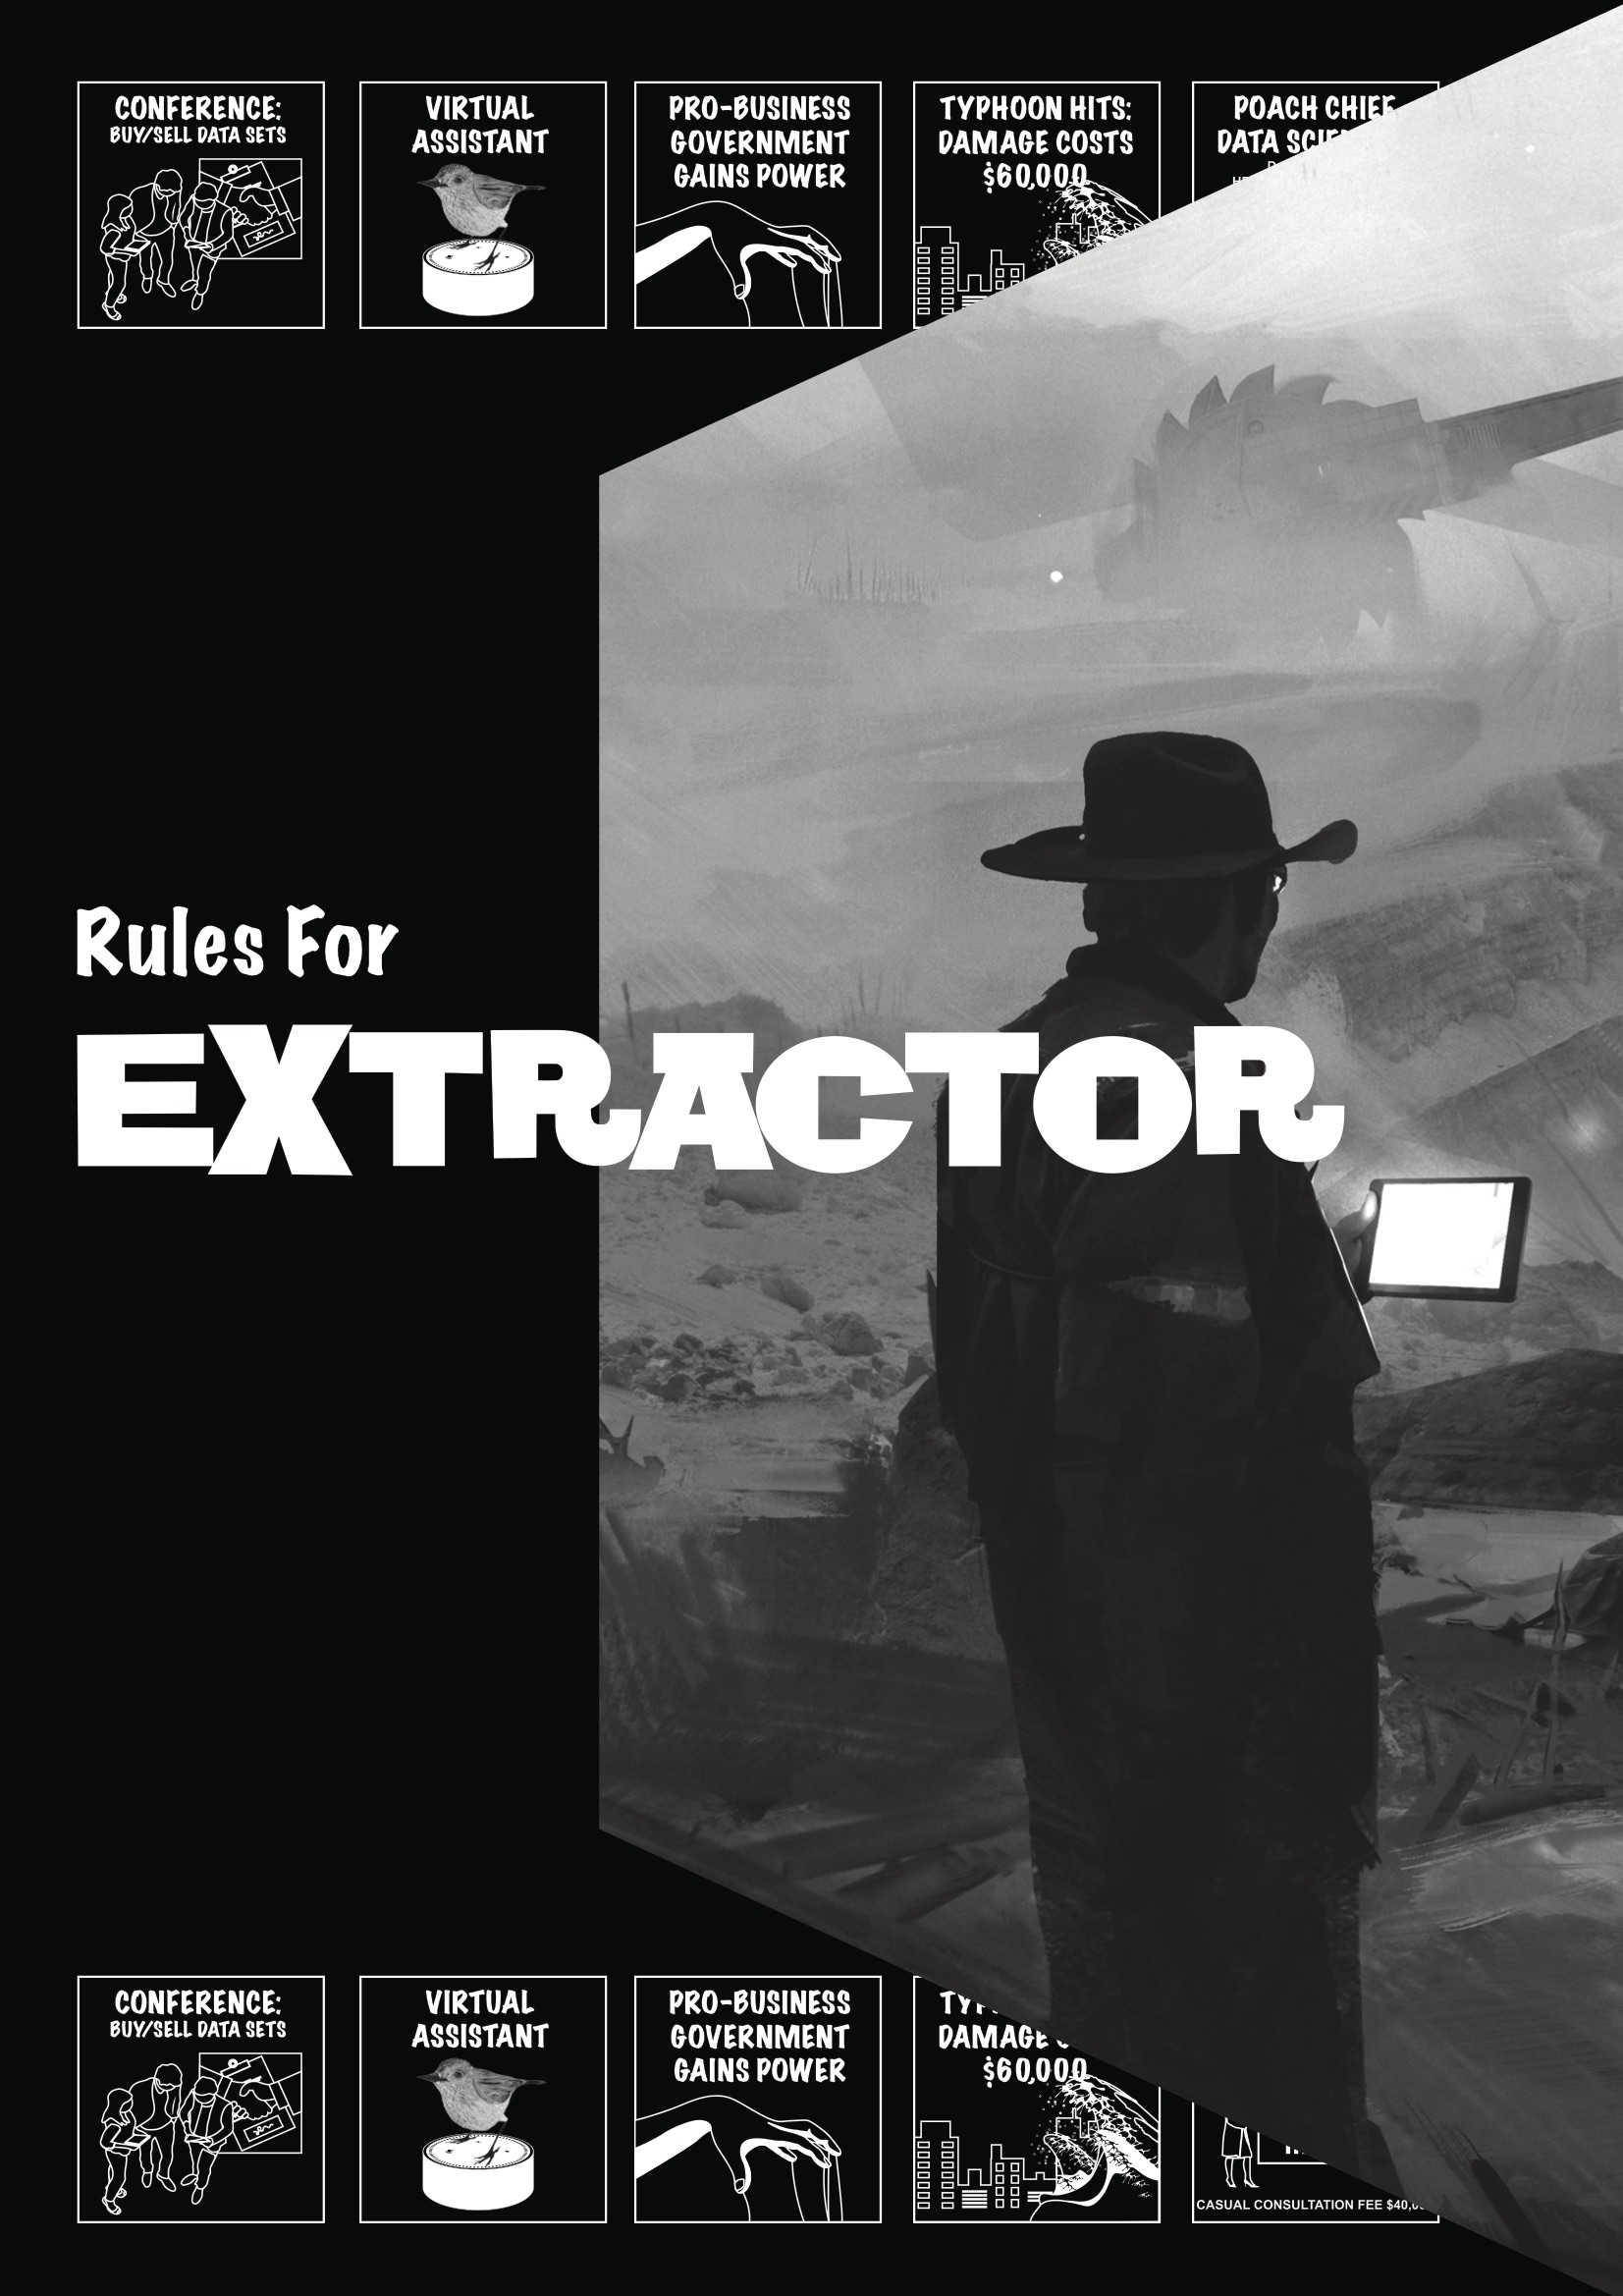 rules_for_extractor_1-1.jpg